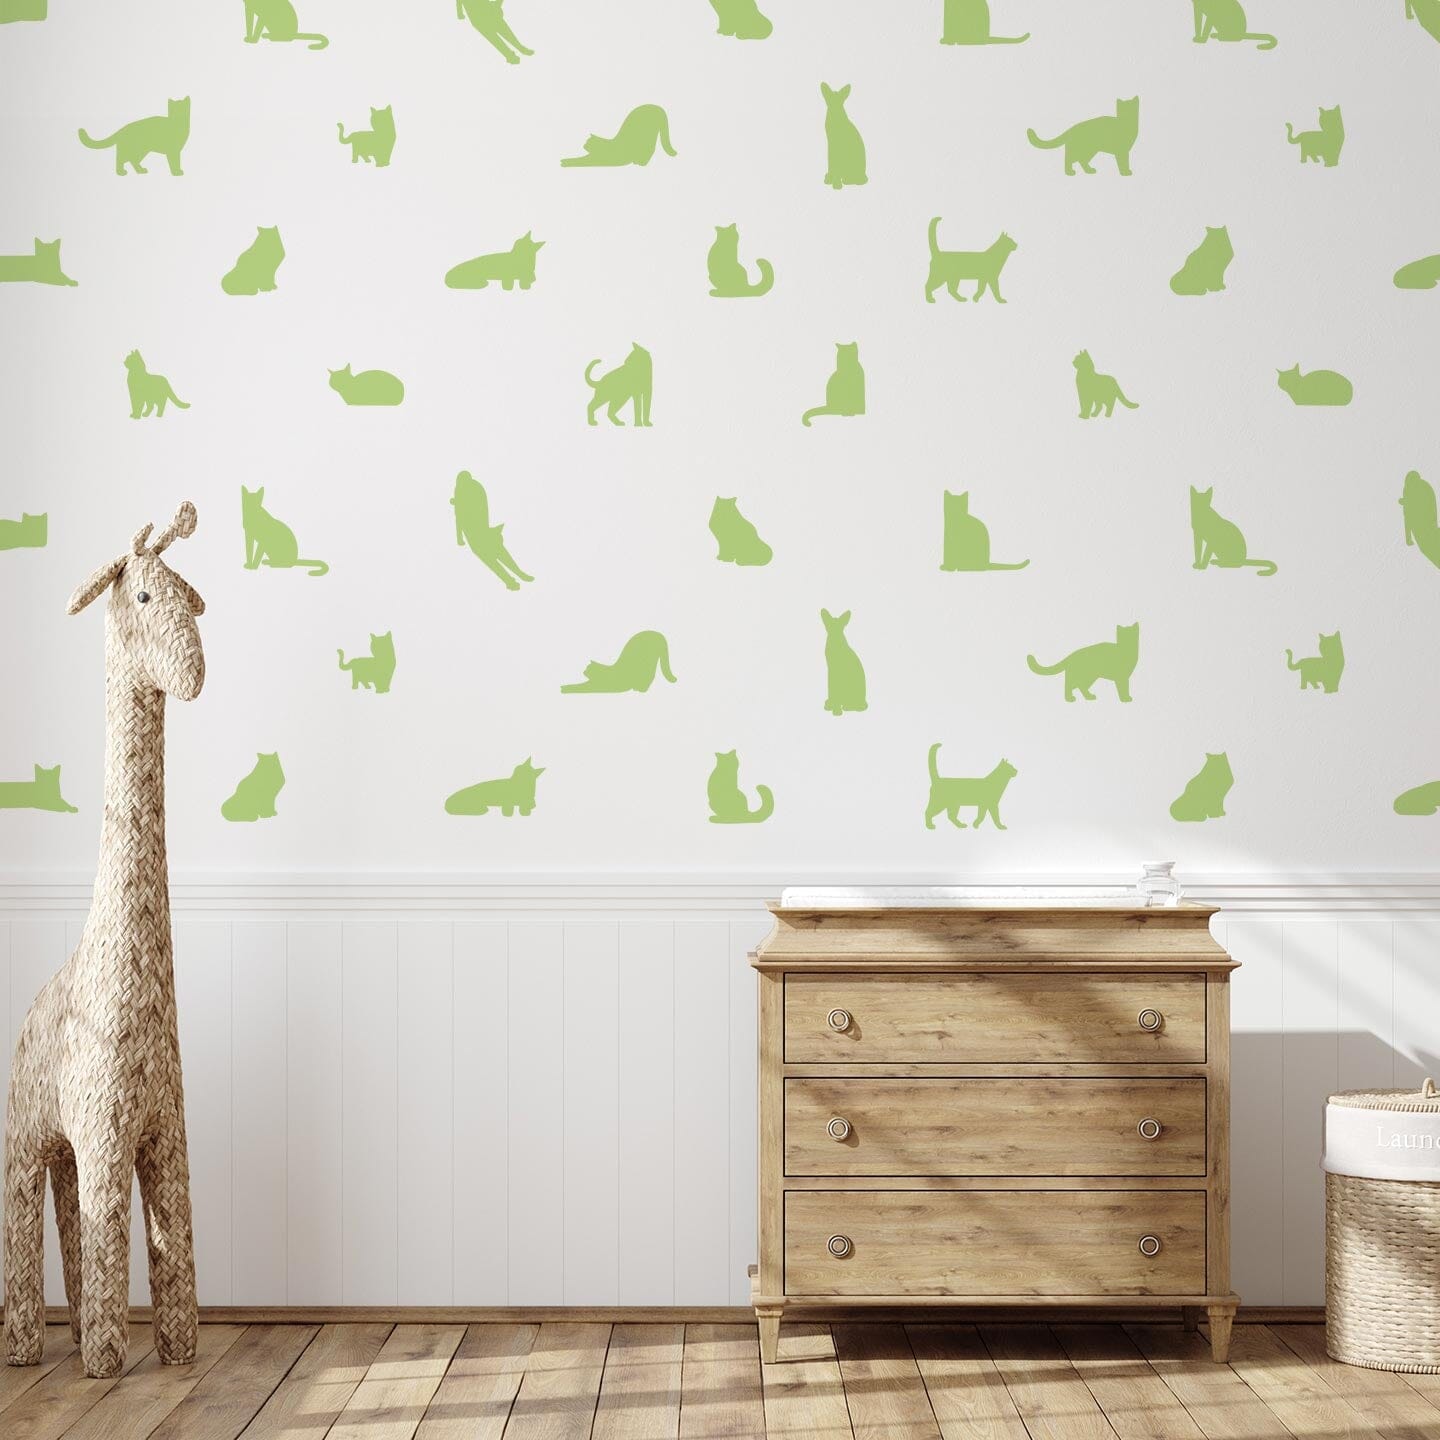 Cat Silhouette Wall Decals Decals Urbanwalls Key Lime 